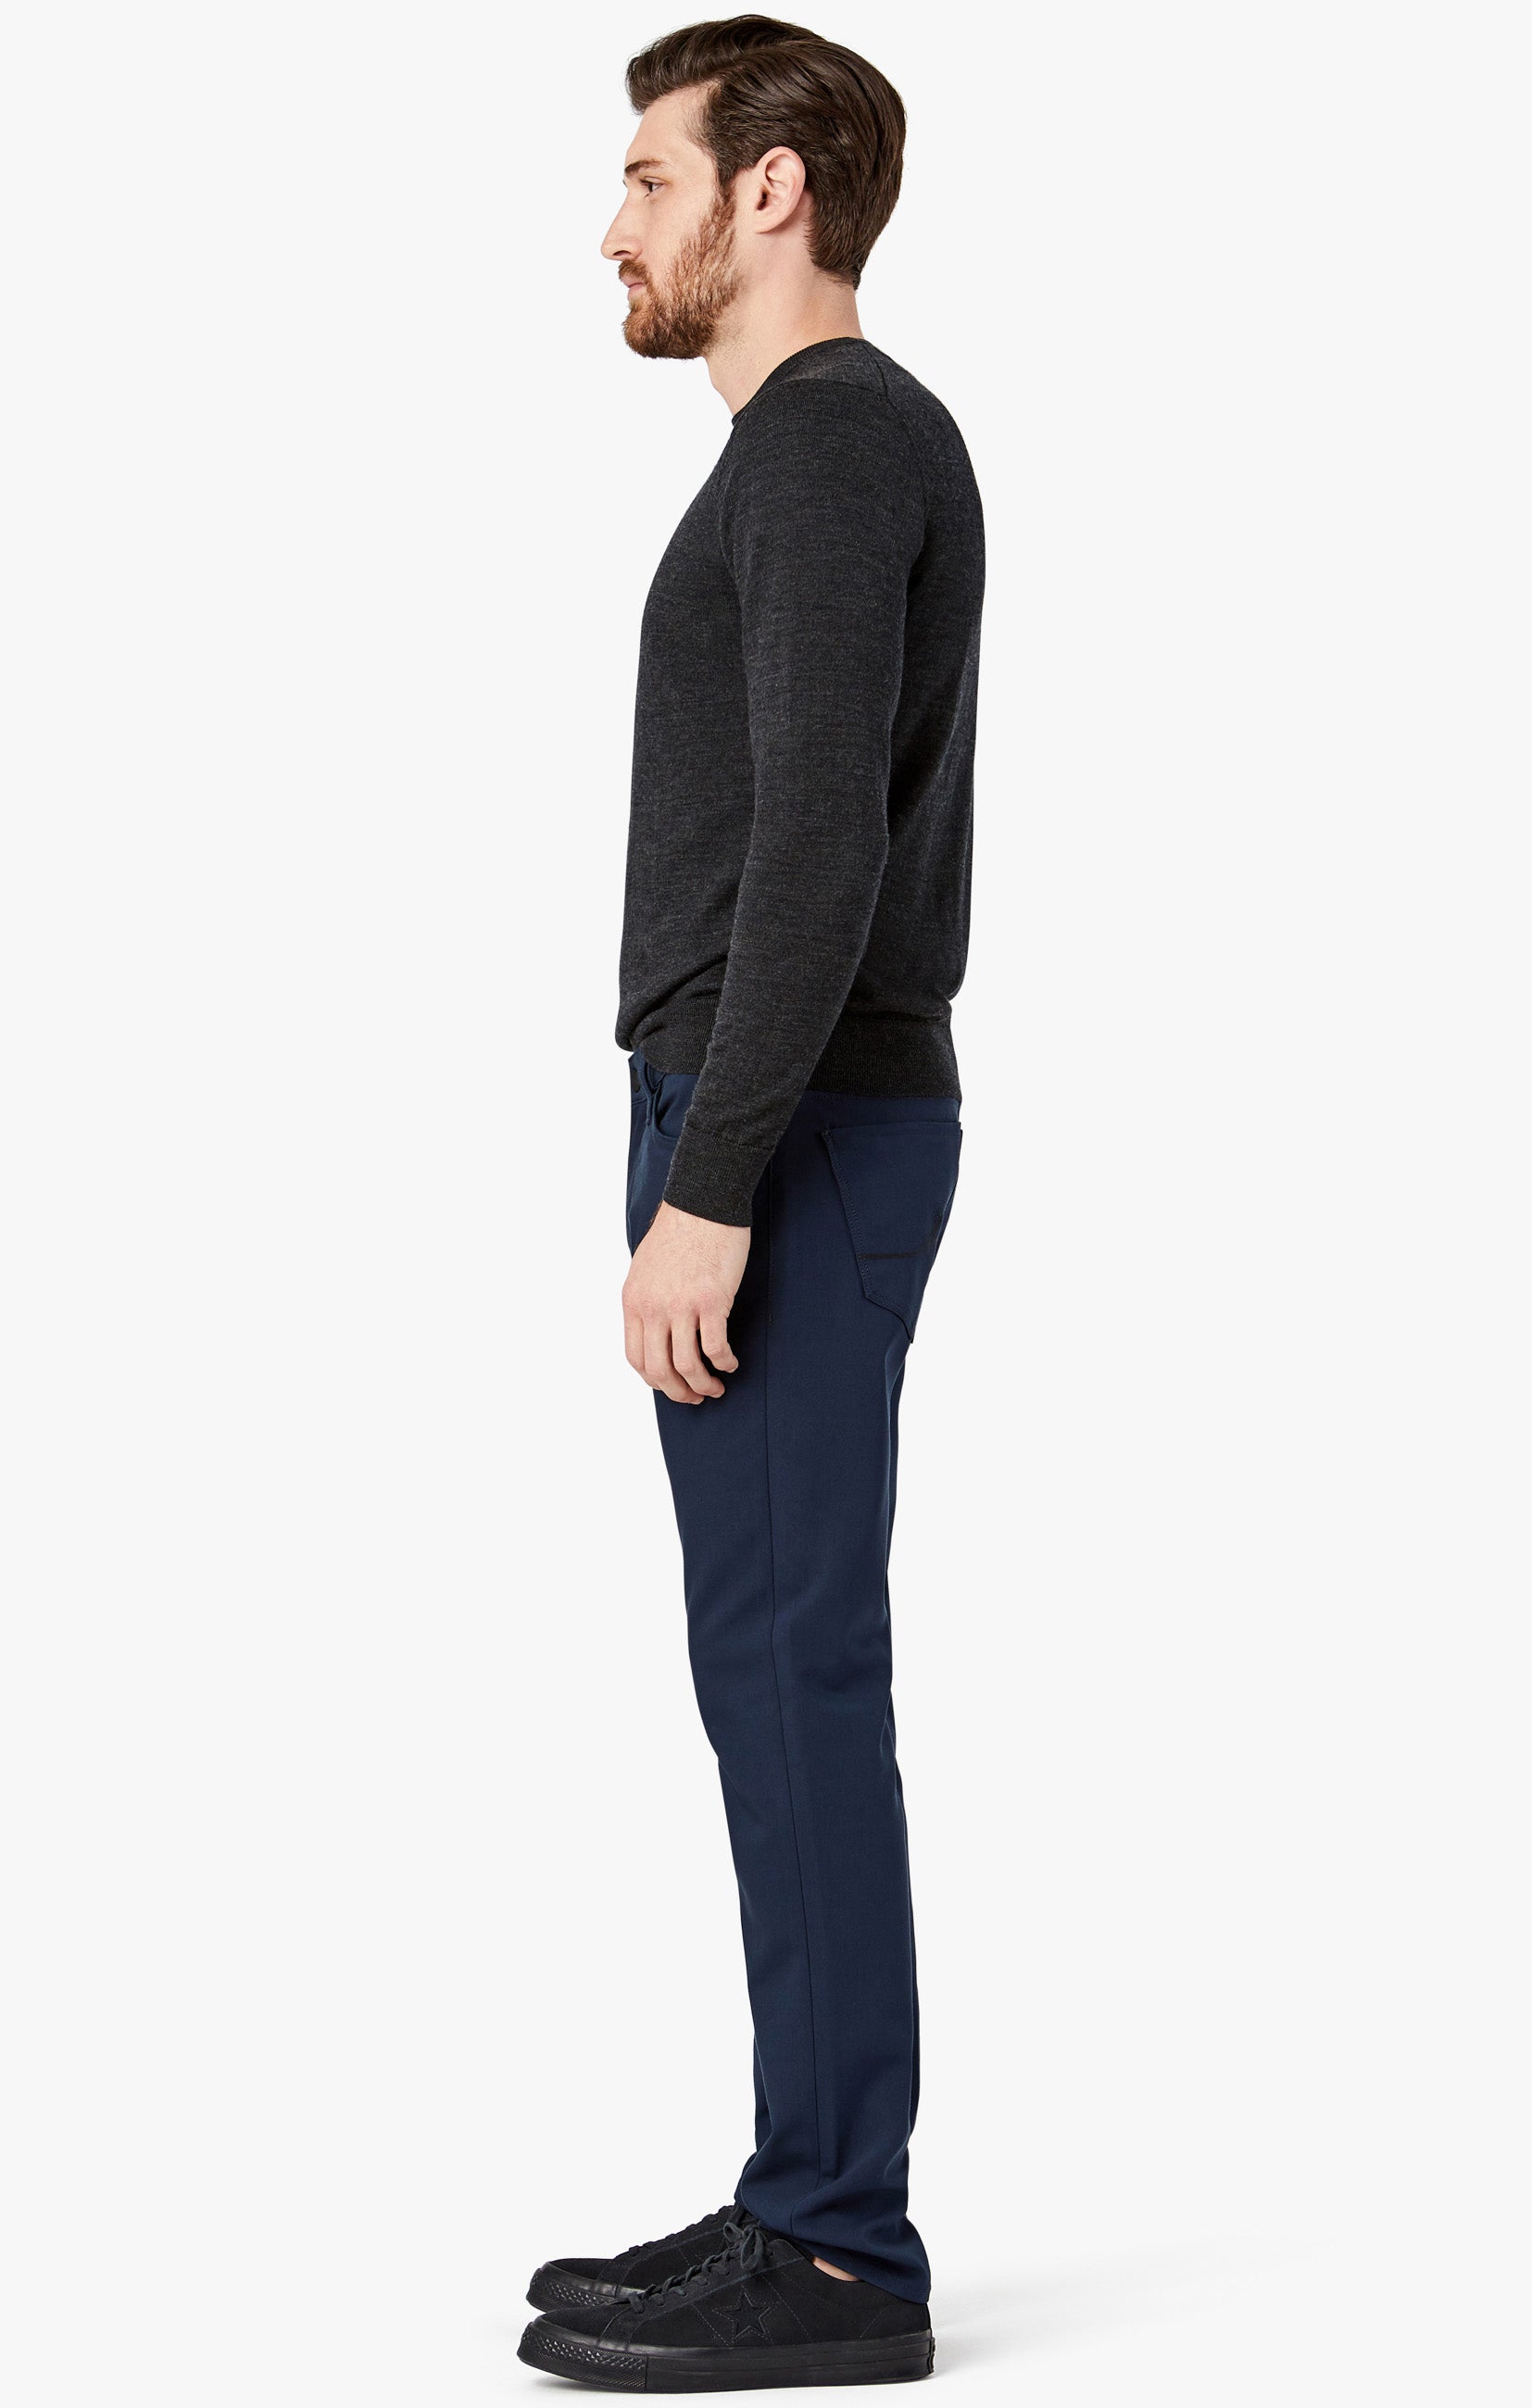 Courage Straight Leg Commuter Pants in Navy Image 4